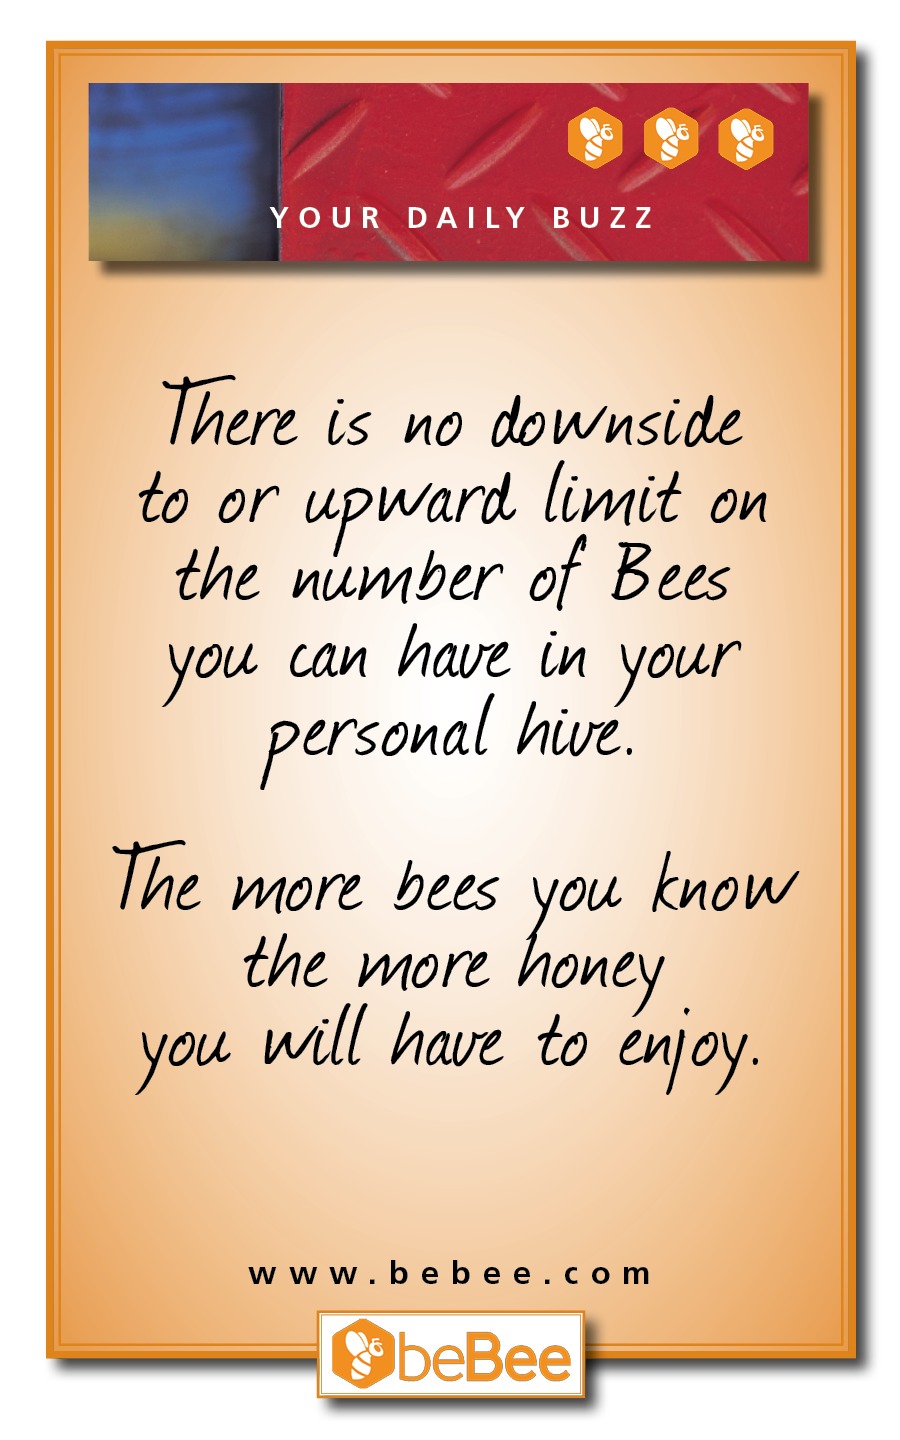 YOUR DAILY BUZZ

There is no downside
to or upward limit on
the number of Bees
you. can have n your
personal hive.

The wore bees 1 know

the wore hone
you will have to enjoy.

www.bebee.com